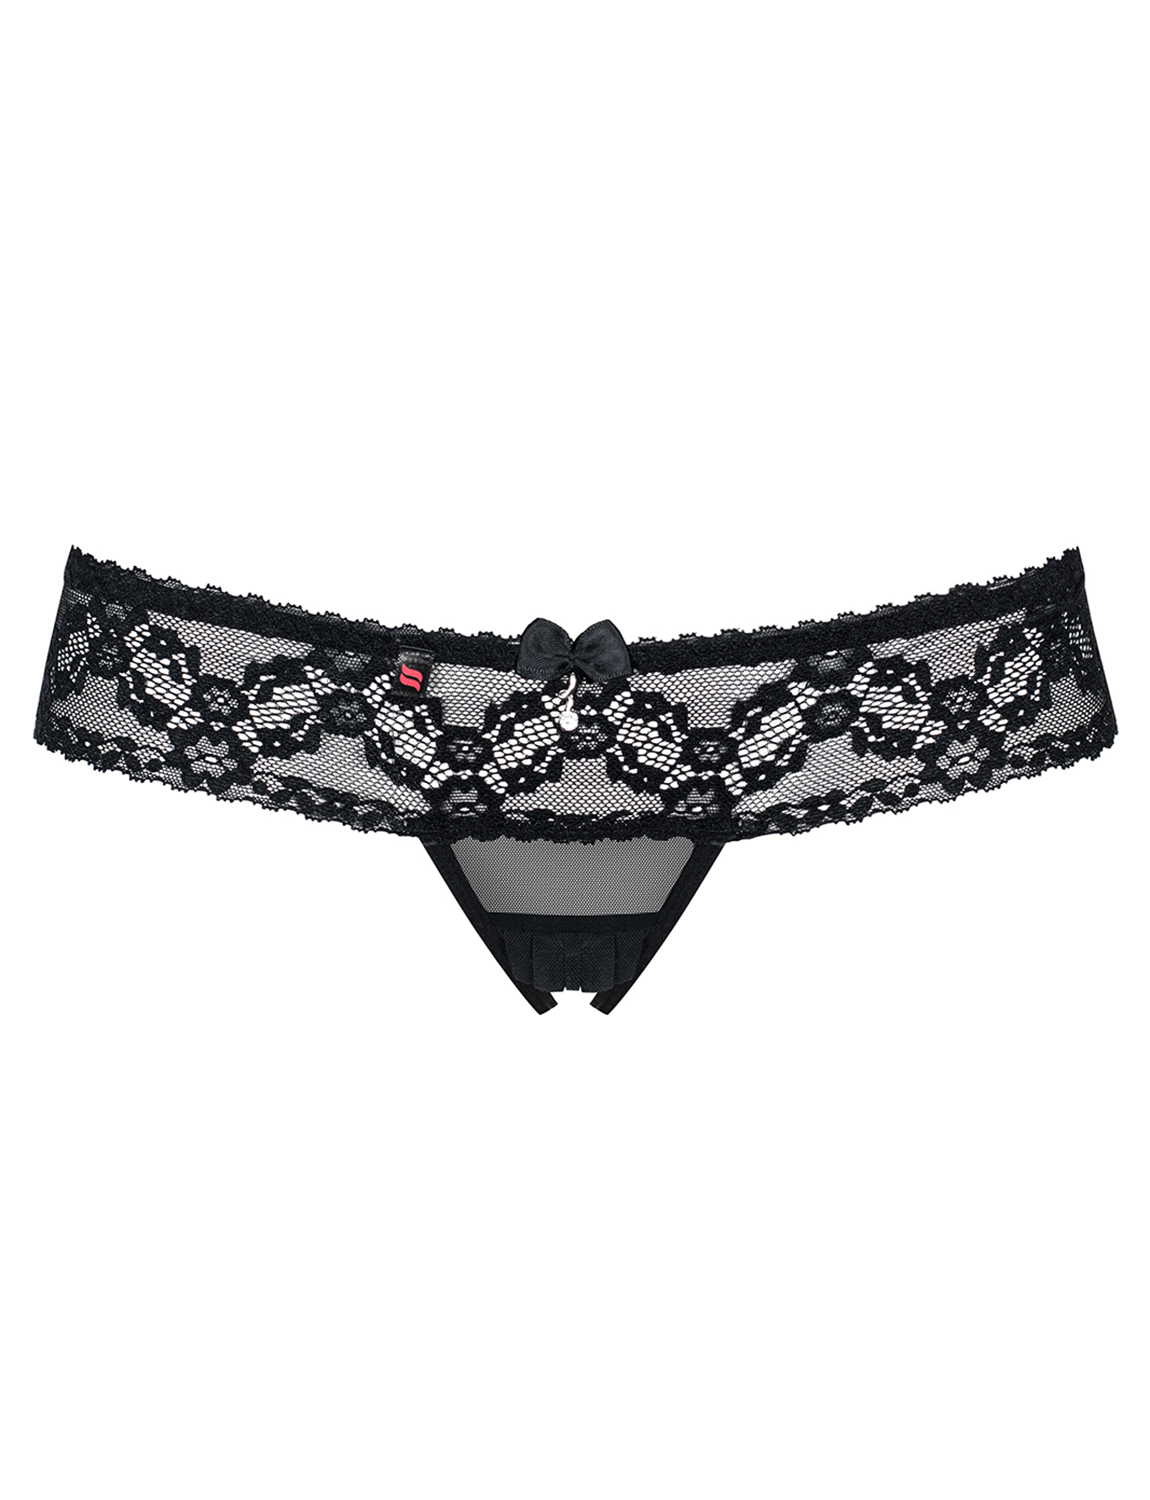 OBSESSIVE Lolitte Luxury Super Soft Decorative Crotchless Thong